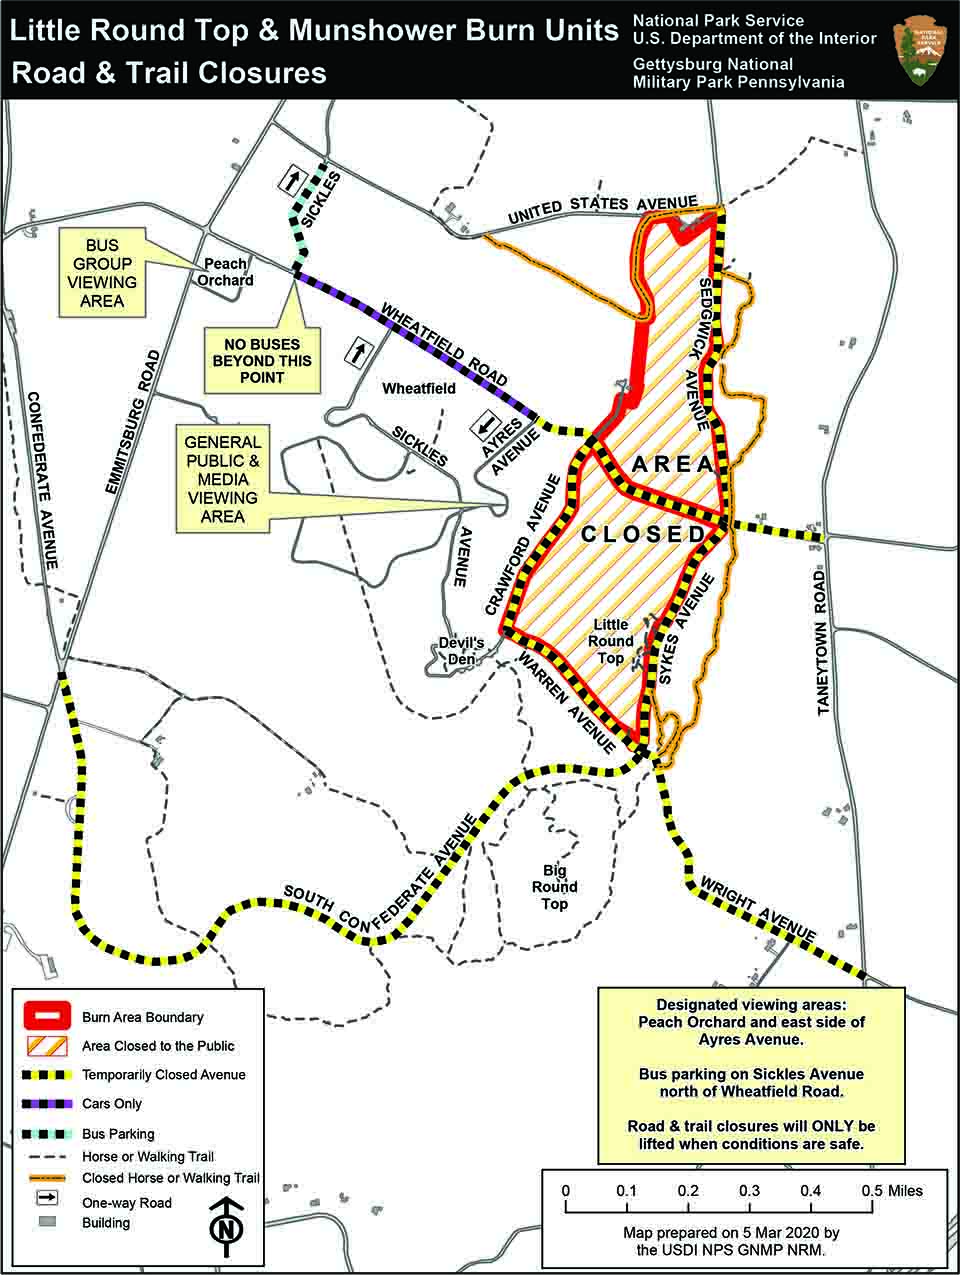 Map showing Little Round Top and Munshower field prescribed fire areas, closed roads, and public viewing areas.